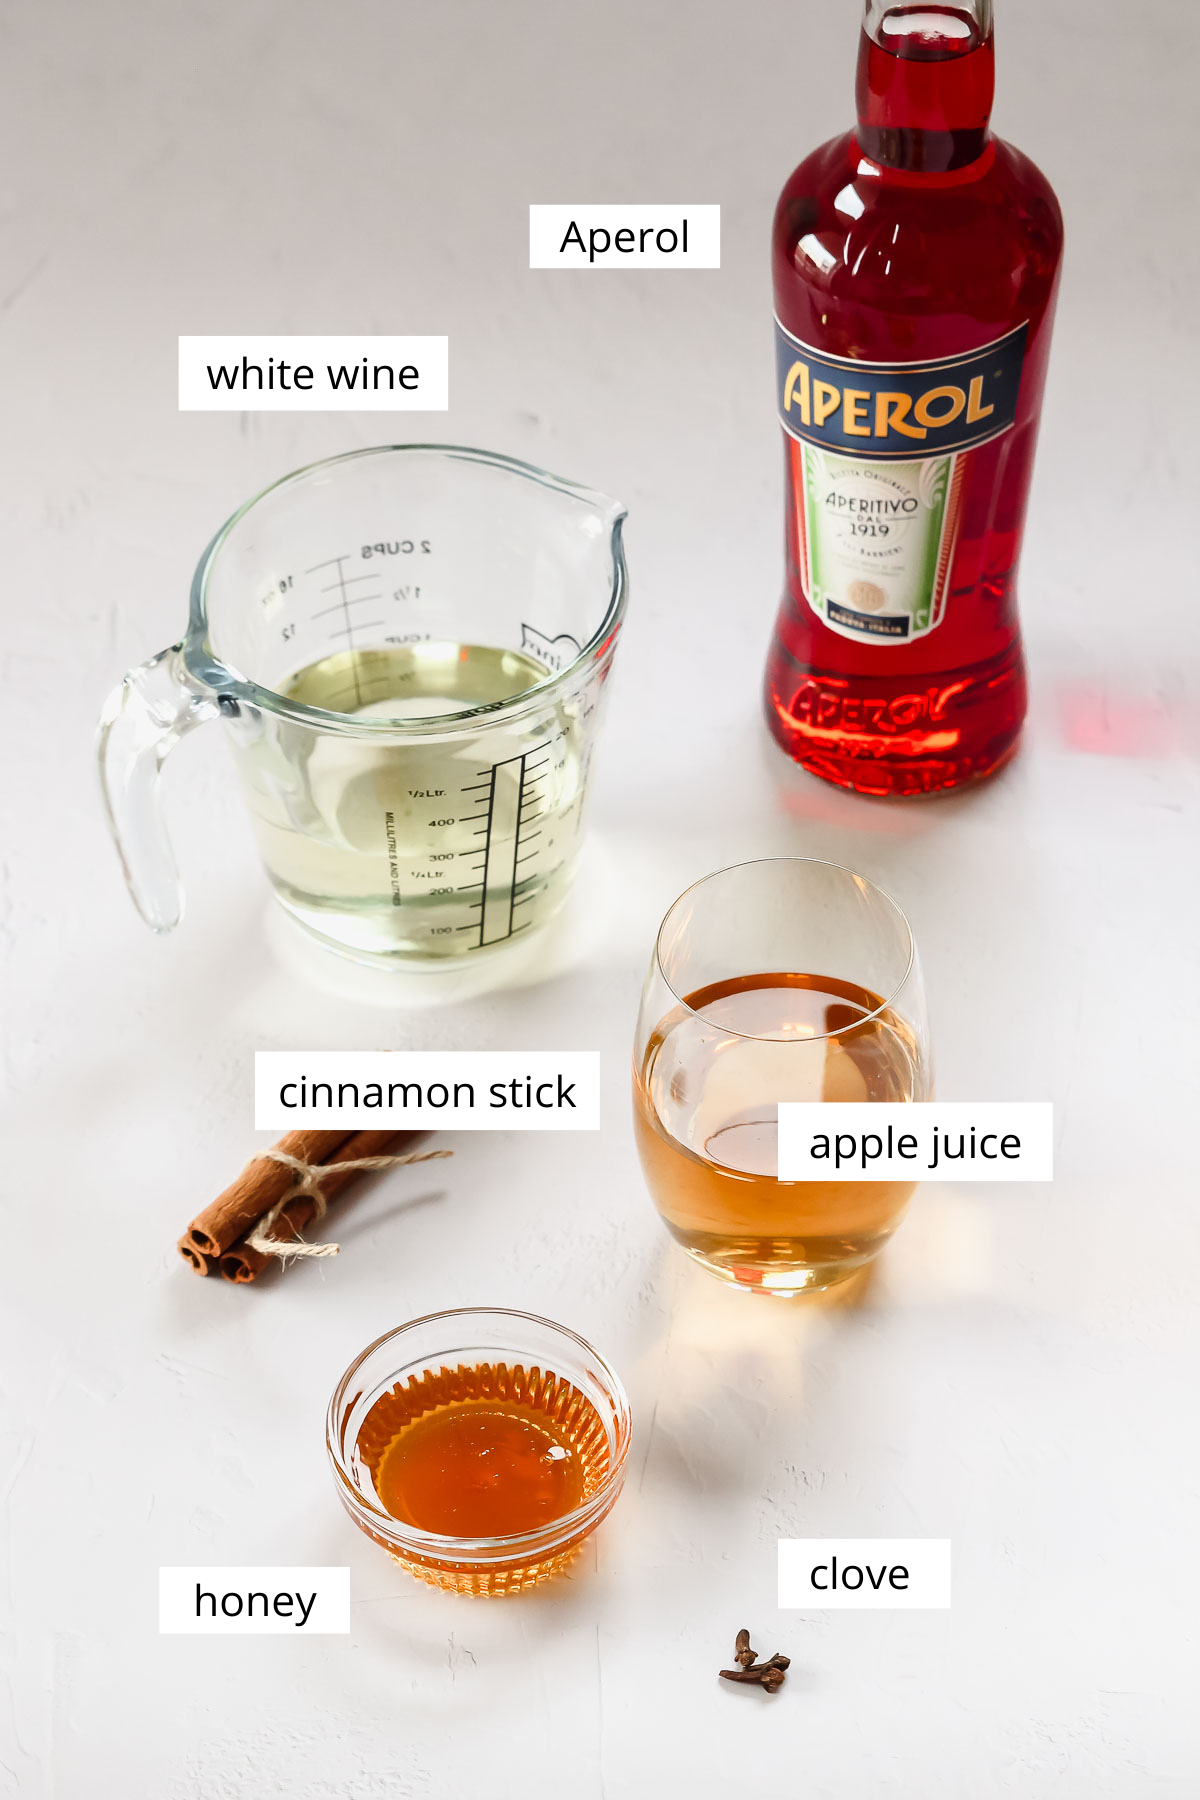 ingredients for hot aperol on grey white background.